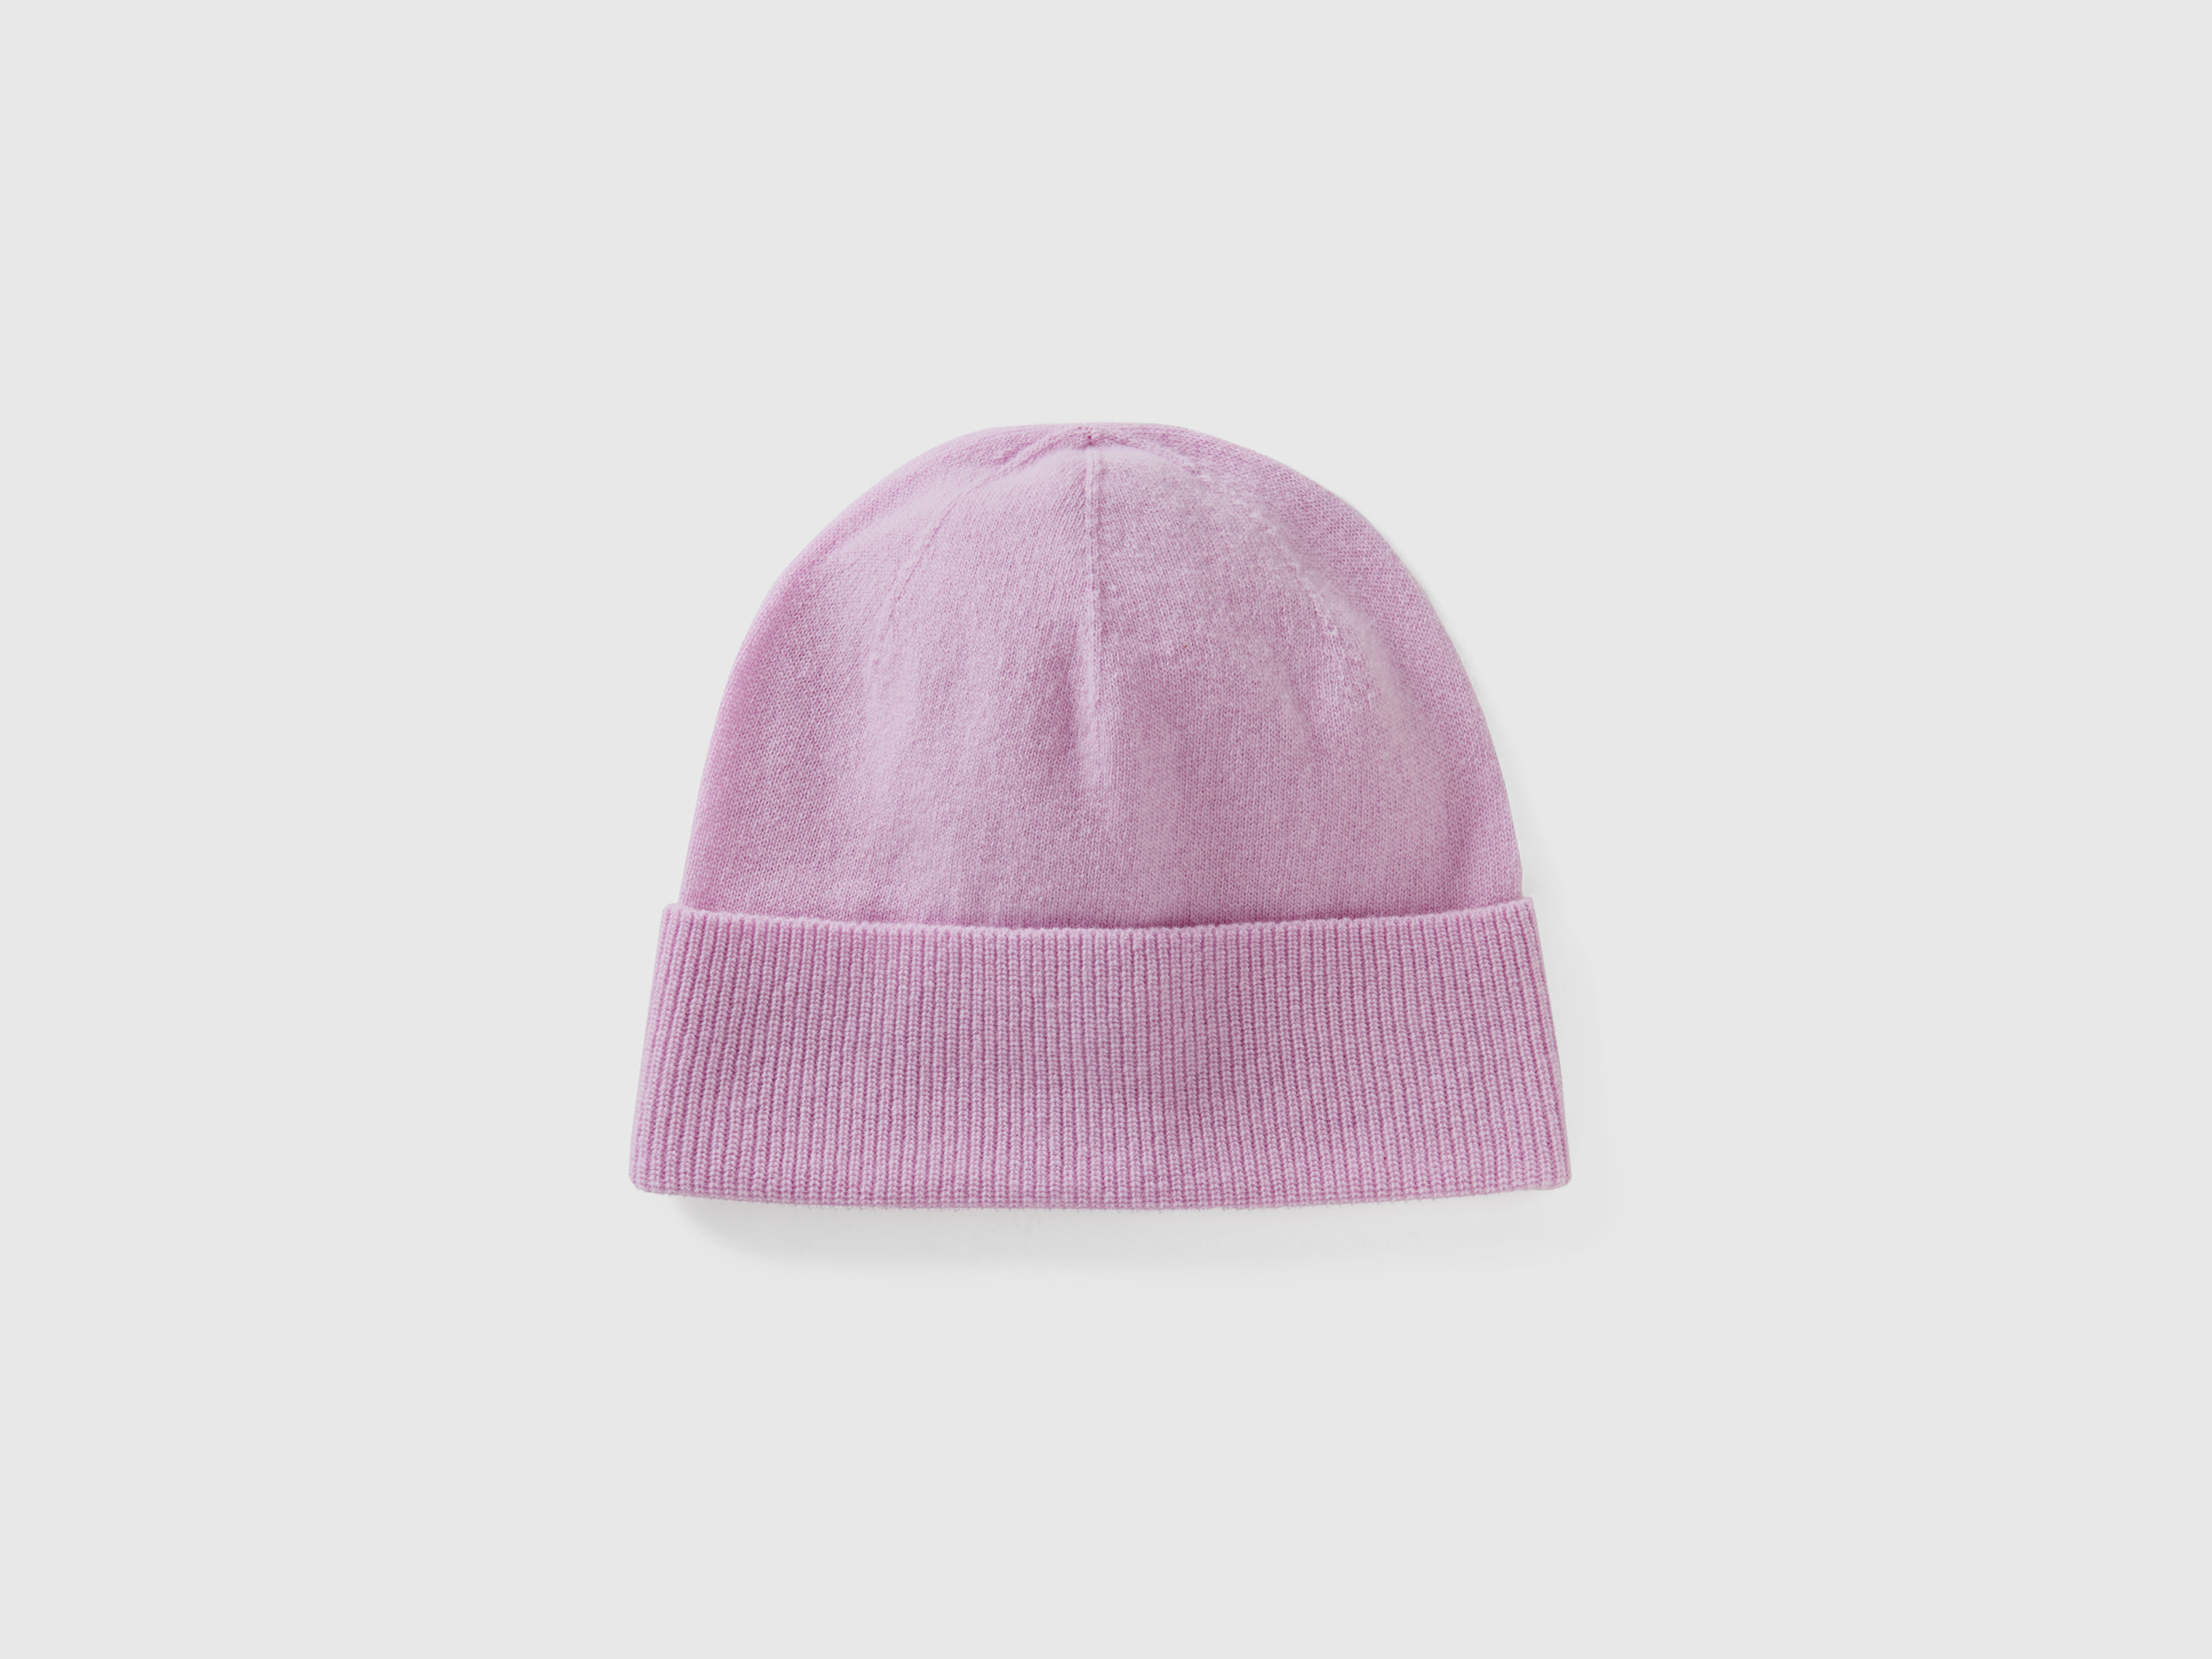 Benetton, Lilac Hat In Pure Merino Wool, size OS, Lilac, Women